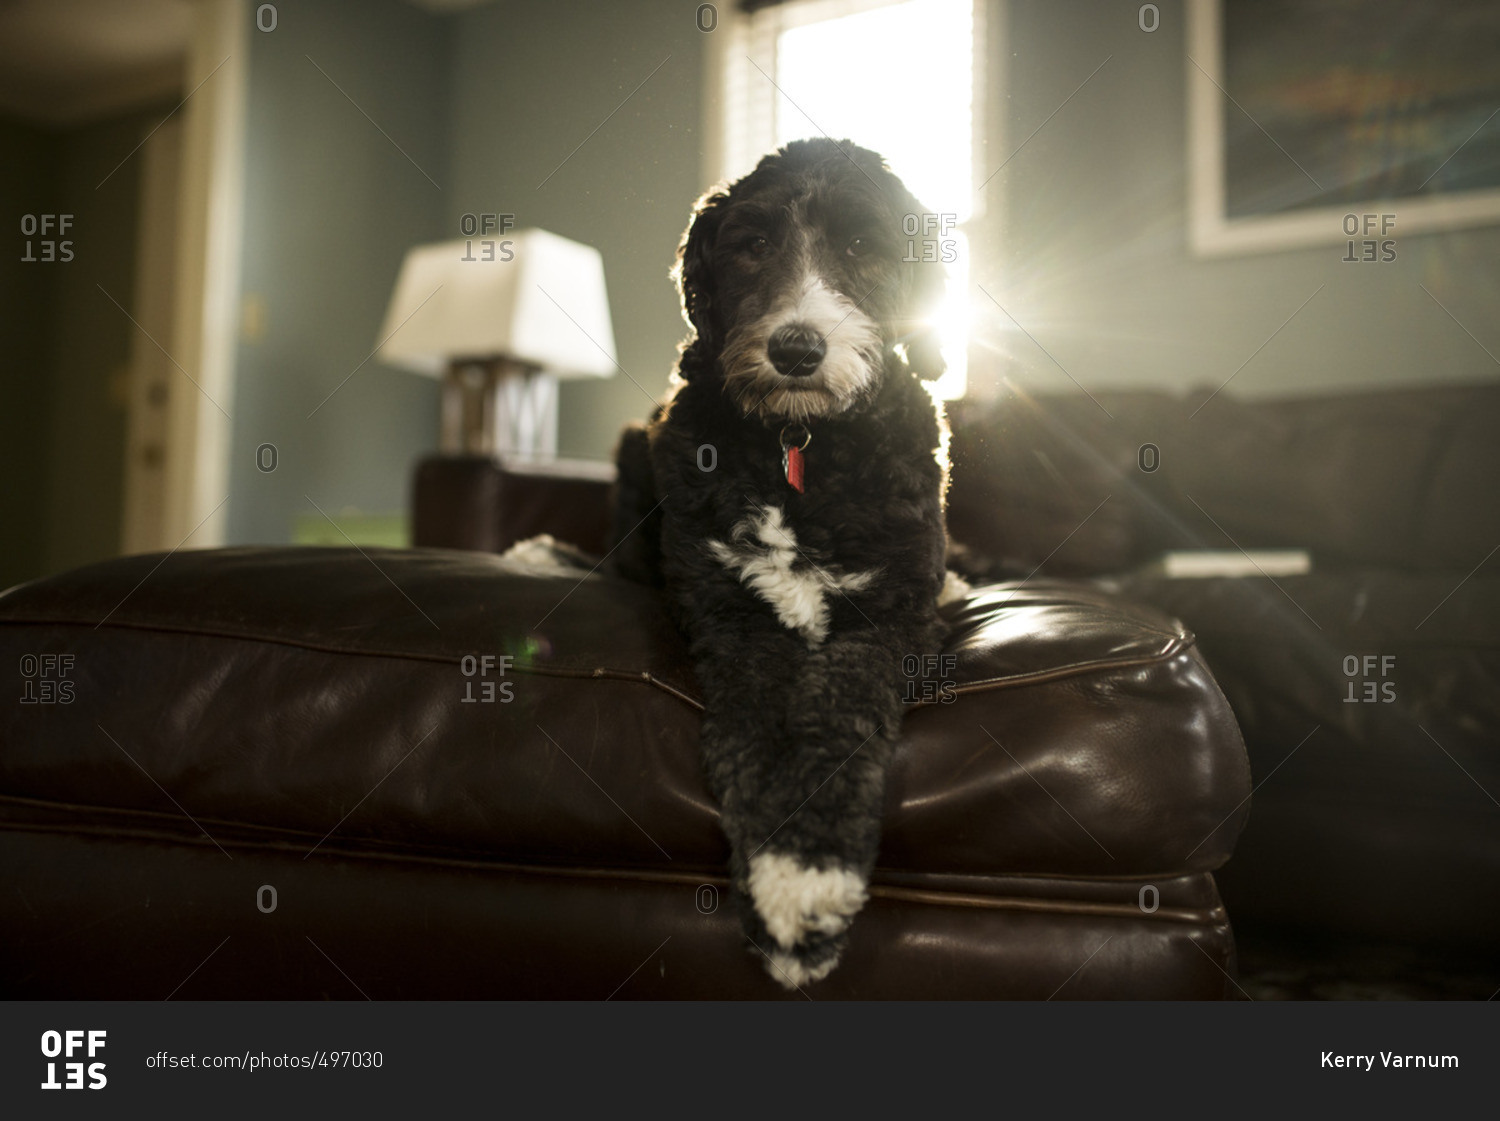 Portrait of dog relaxing on leather ottoman